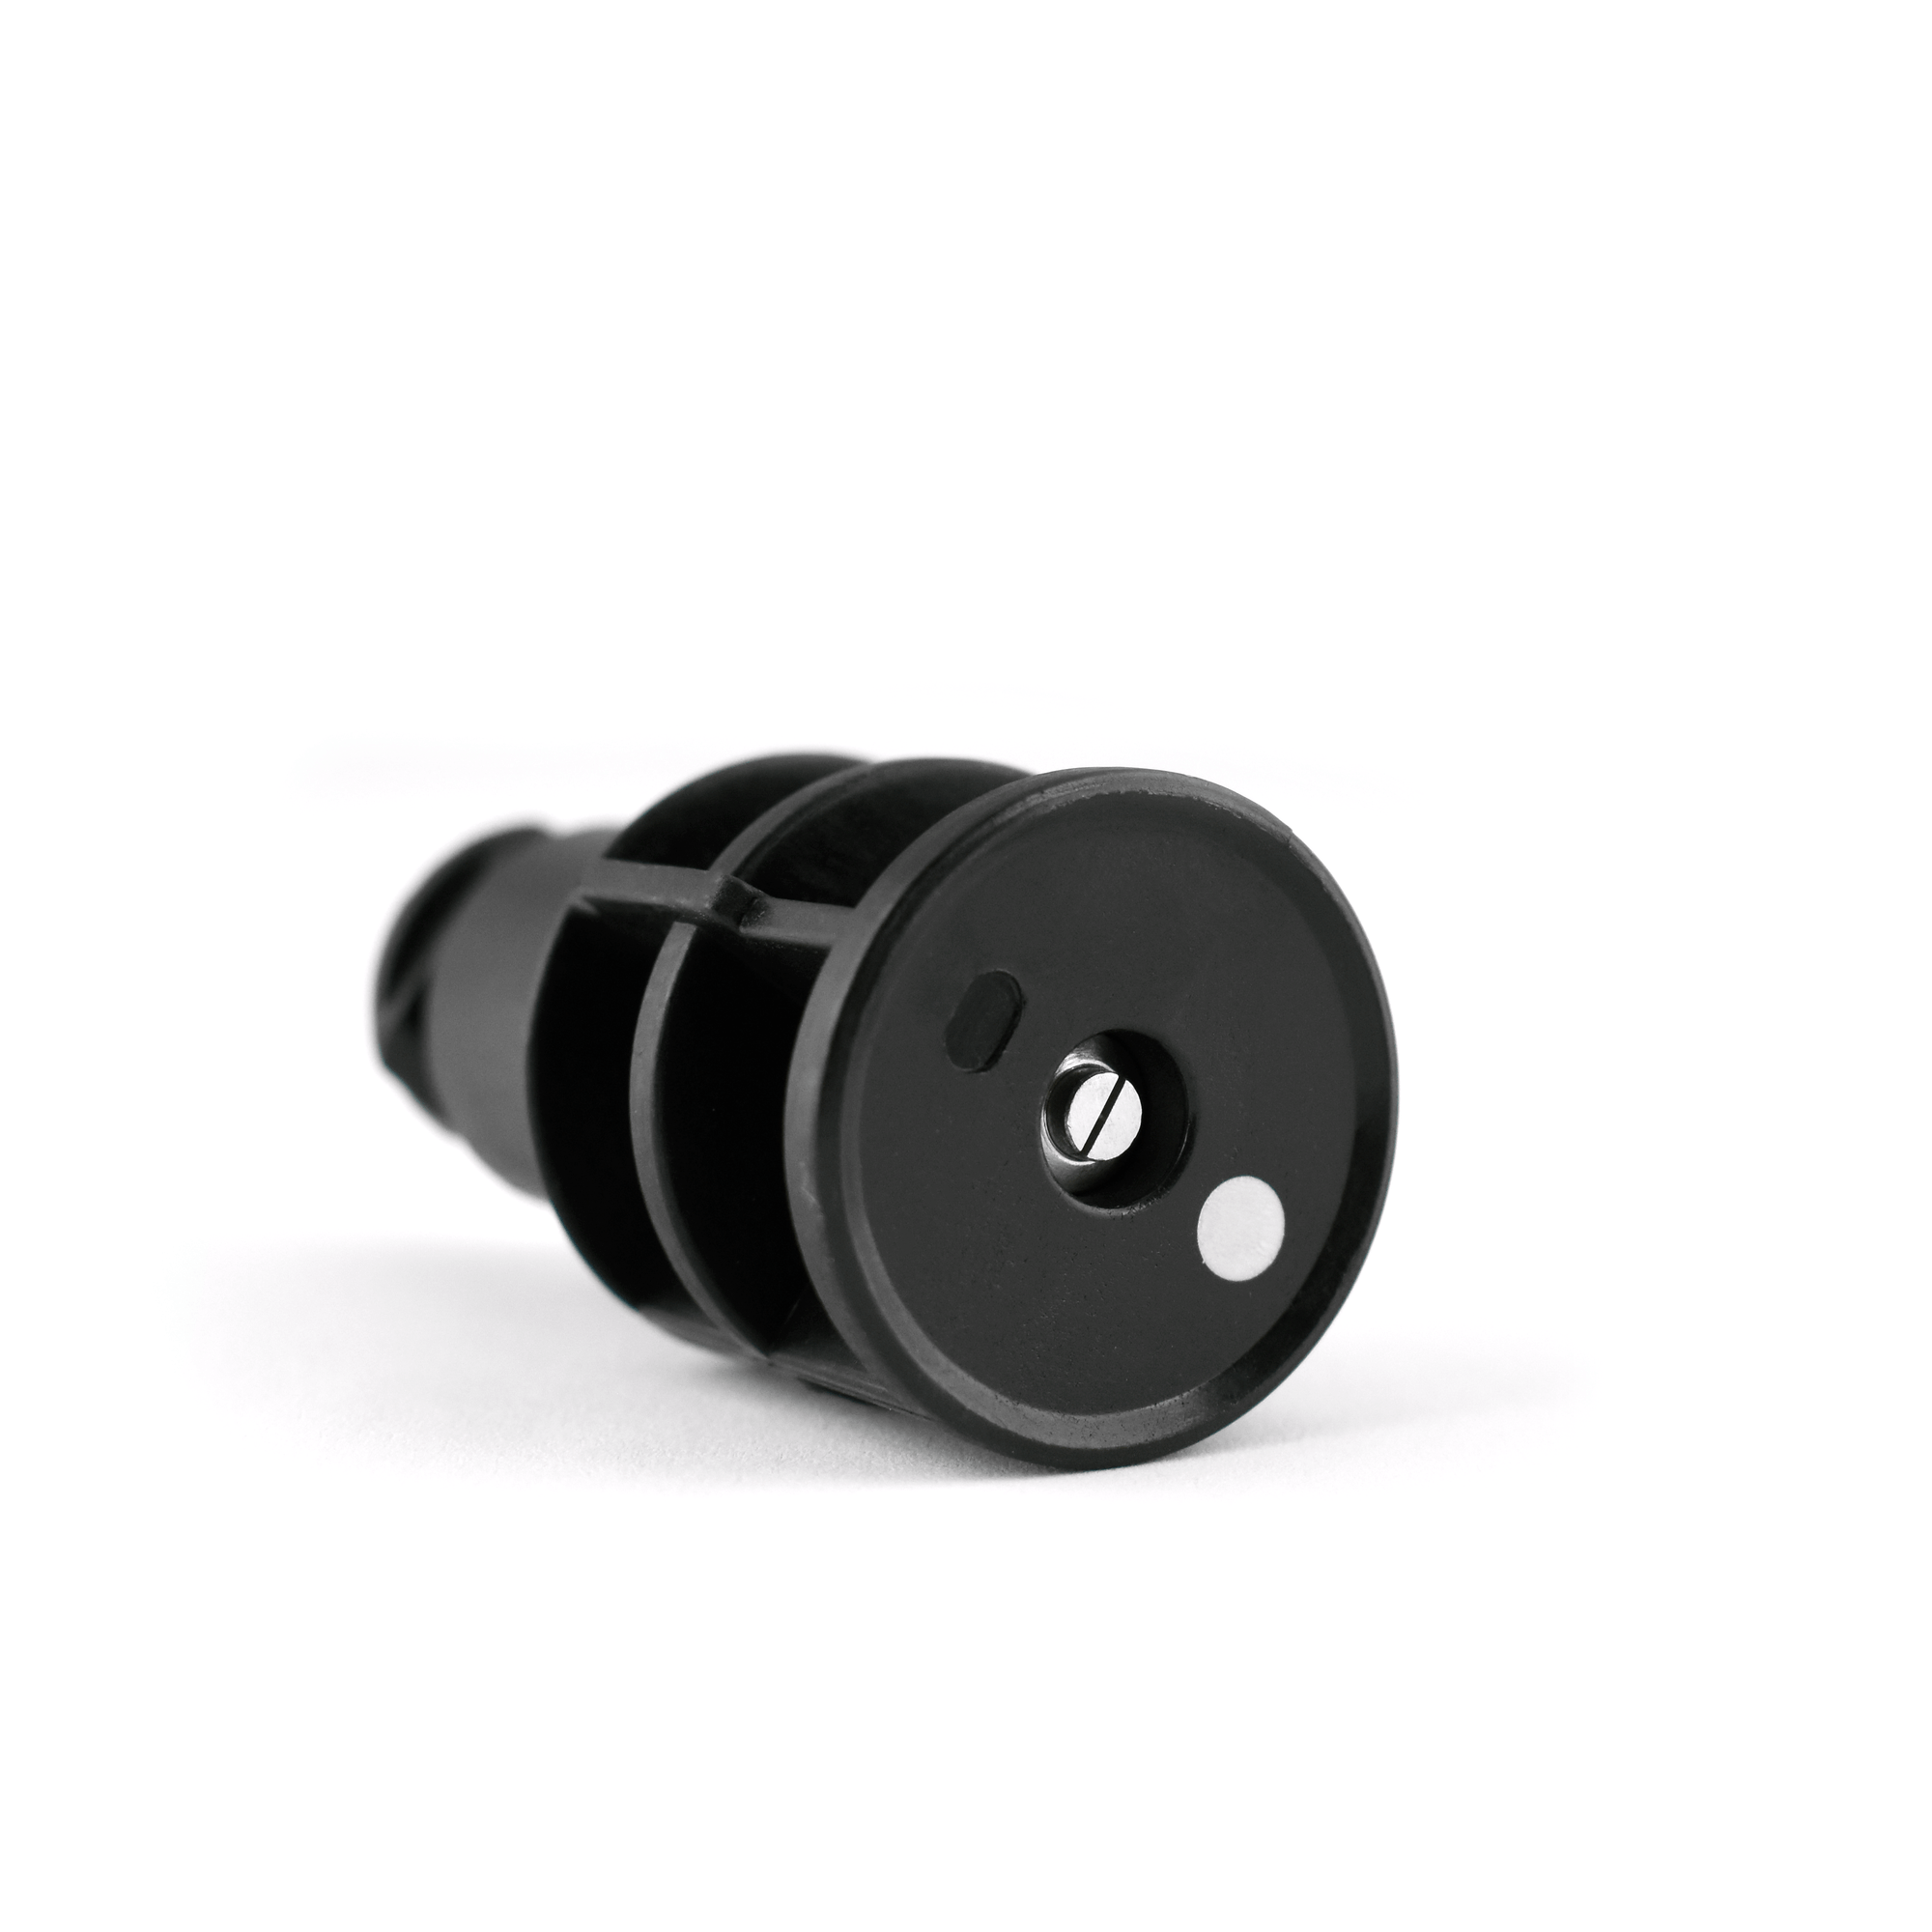  Victory Innovations Single 110 Micron Nozzle (VP59) 